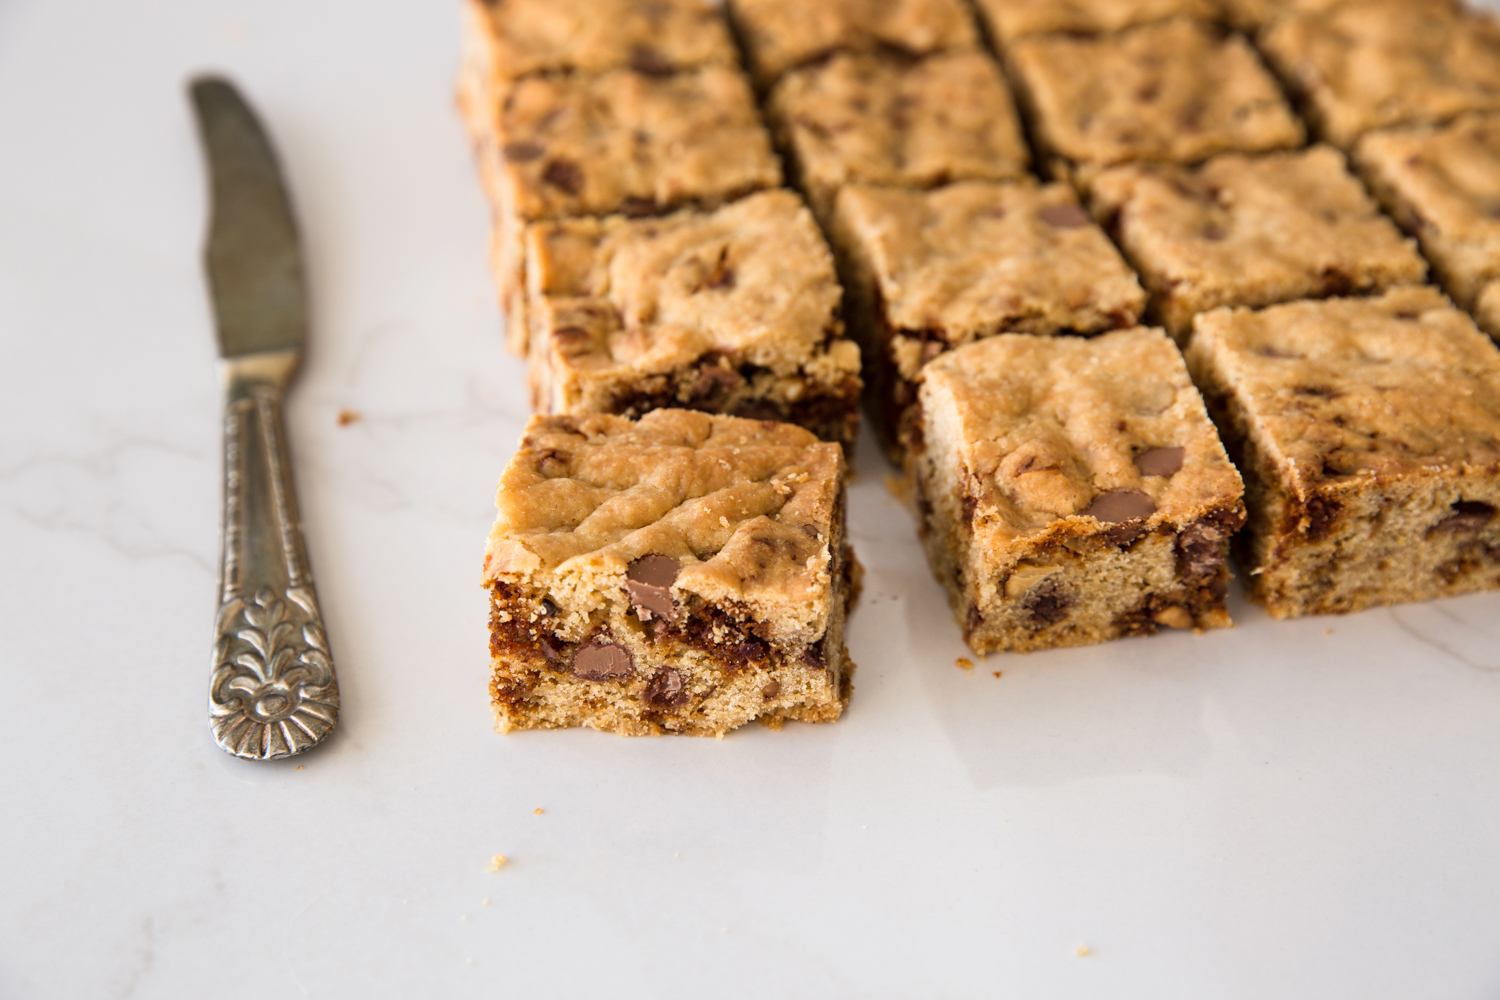 Chocolate Chip Blondies with Peanut Butter and Almonds